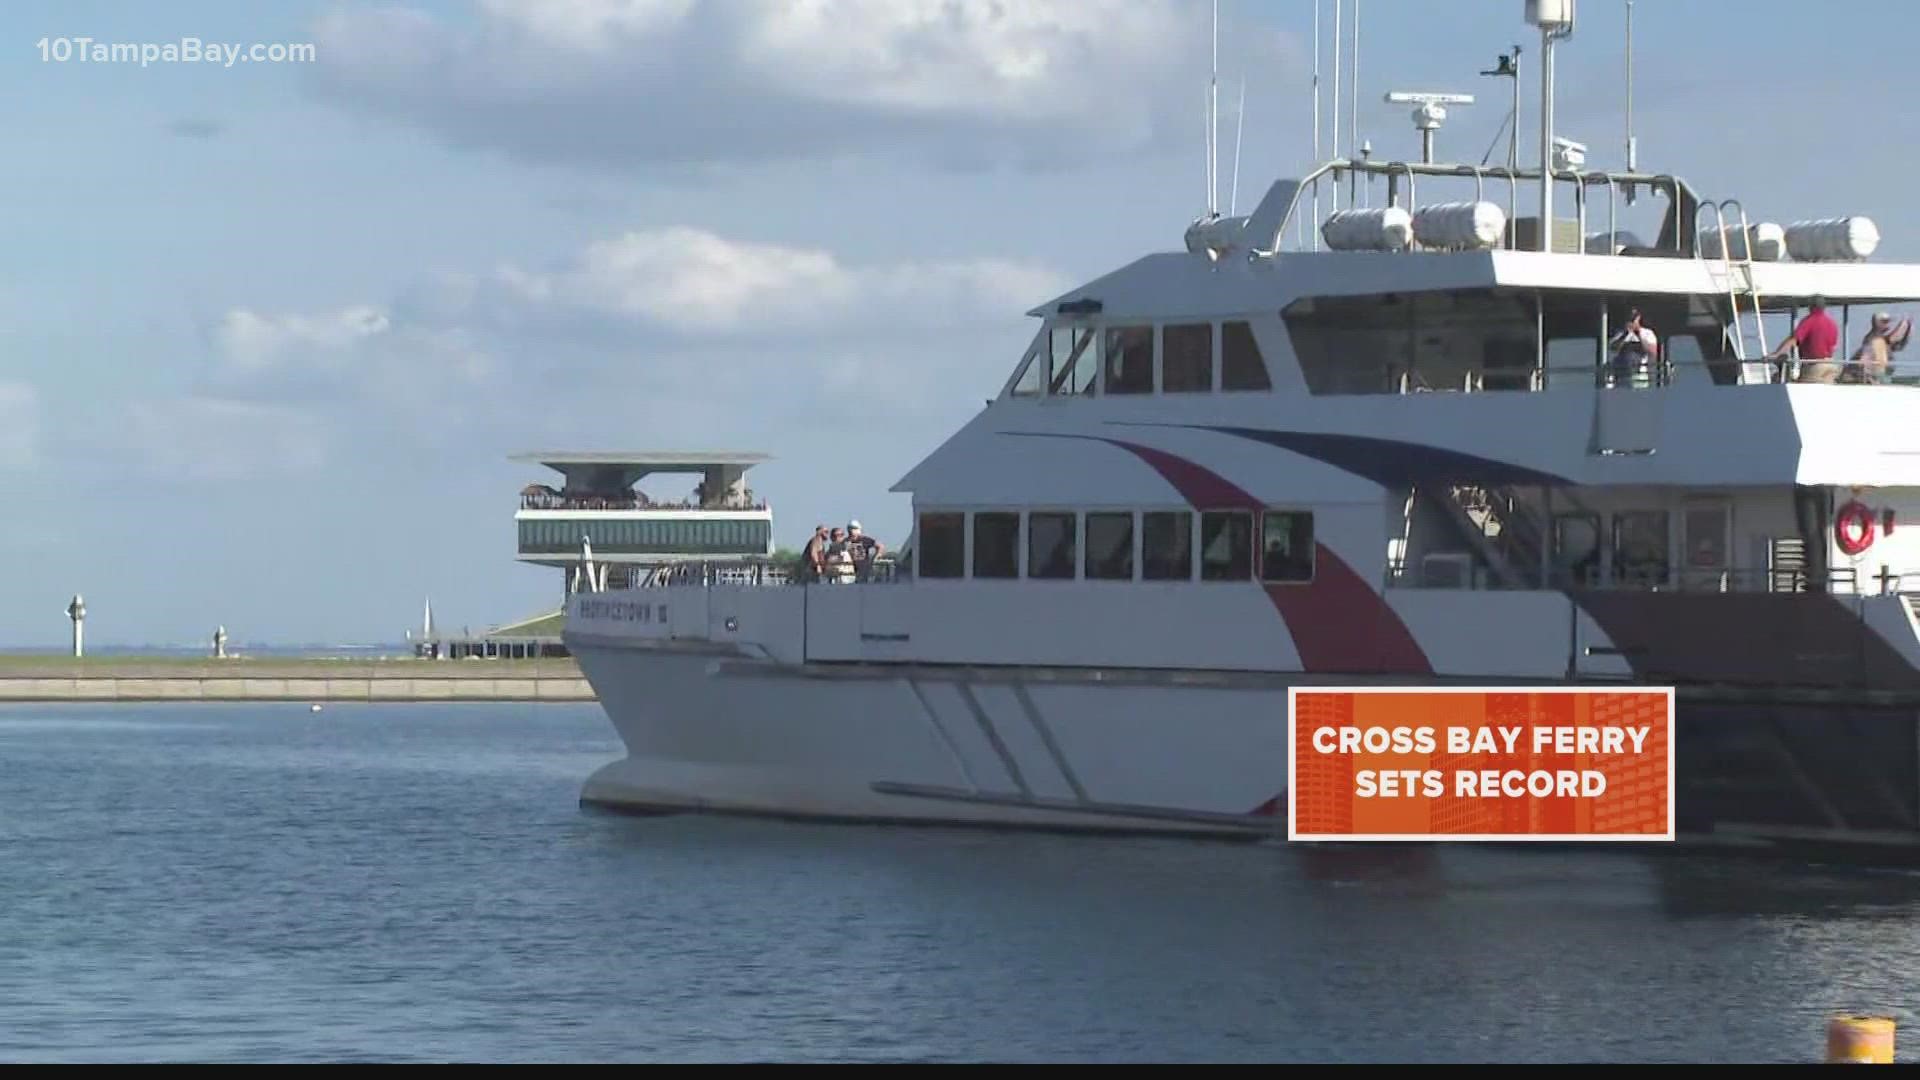 The Cross-Bay Ferry kicked off its fifth season of service in Tampa Bay on Oct. 21.